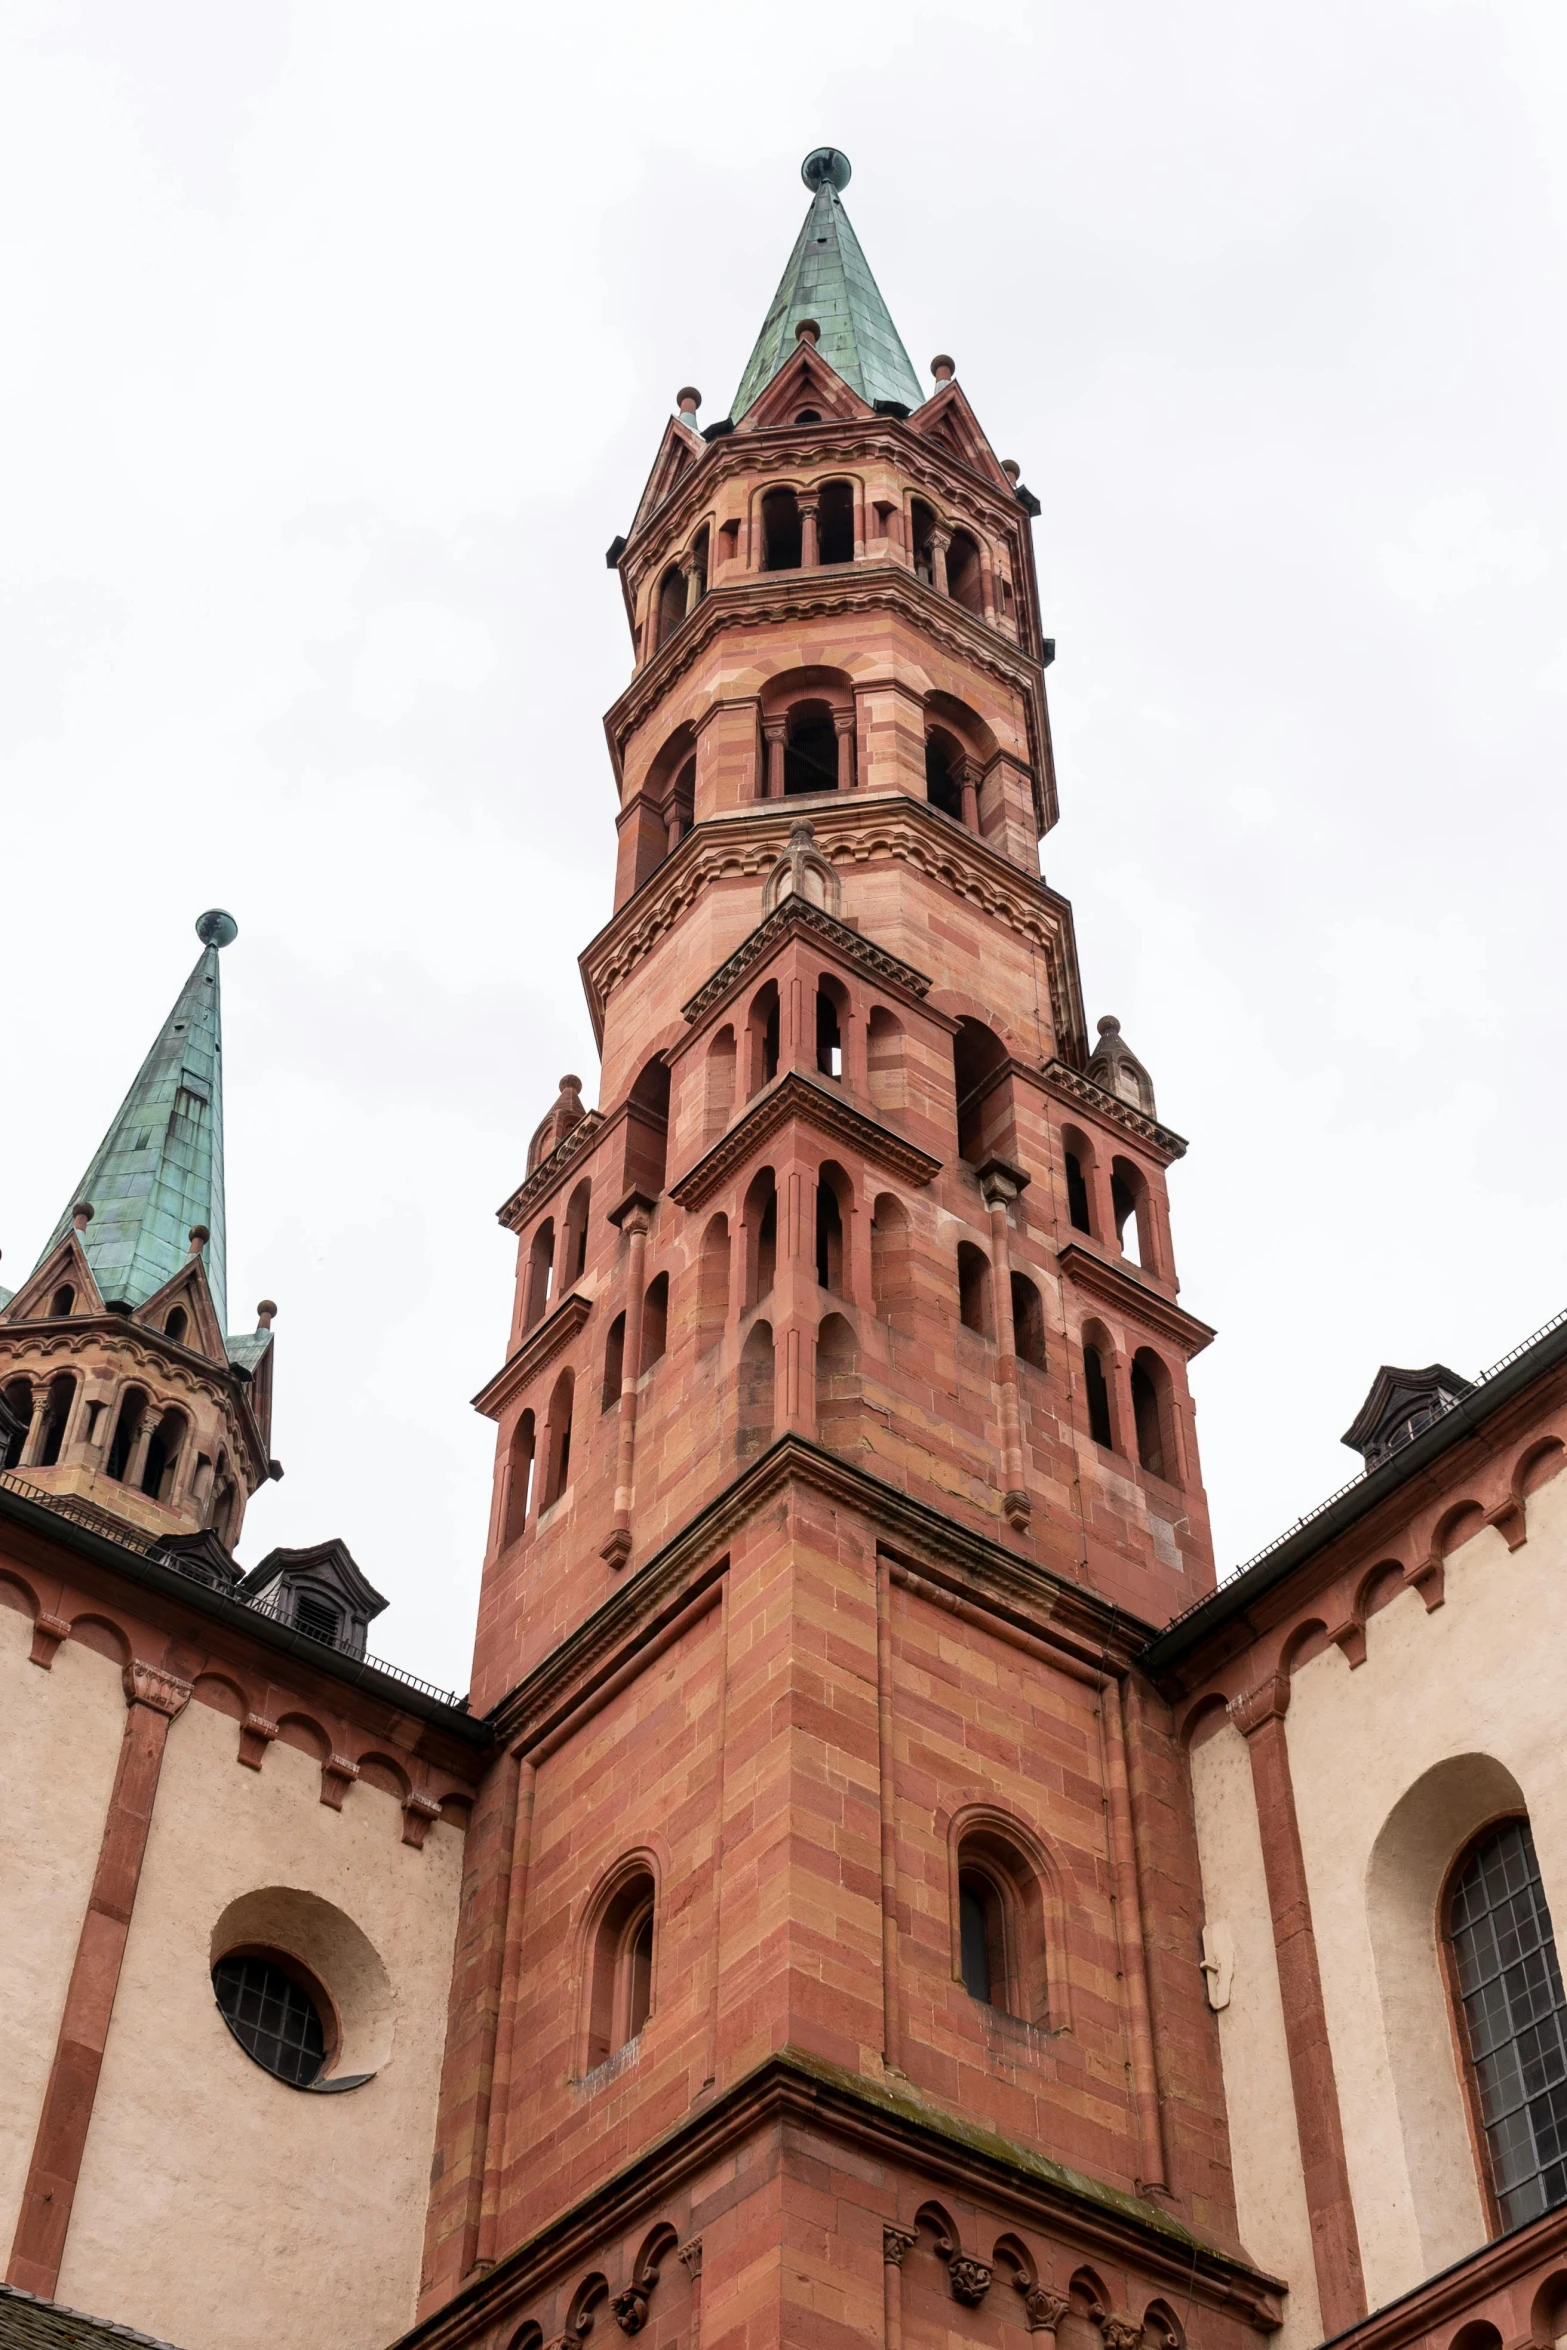 a tall tower with a clock on top of it, inspired by Rainer Maria Latzke, romanesque, lead - covered spire, pink marble building, details galore, panorama